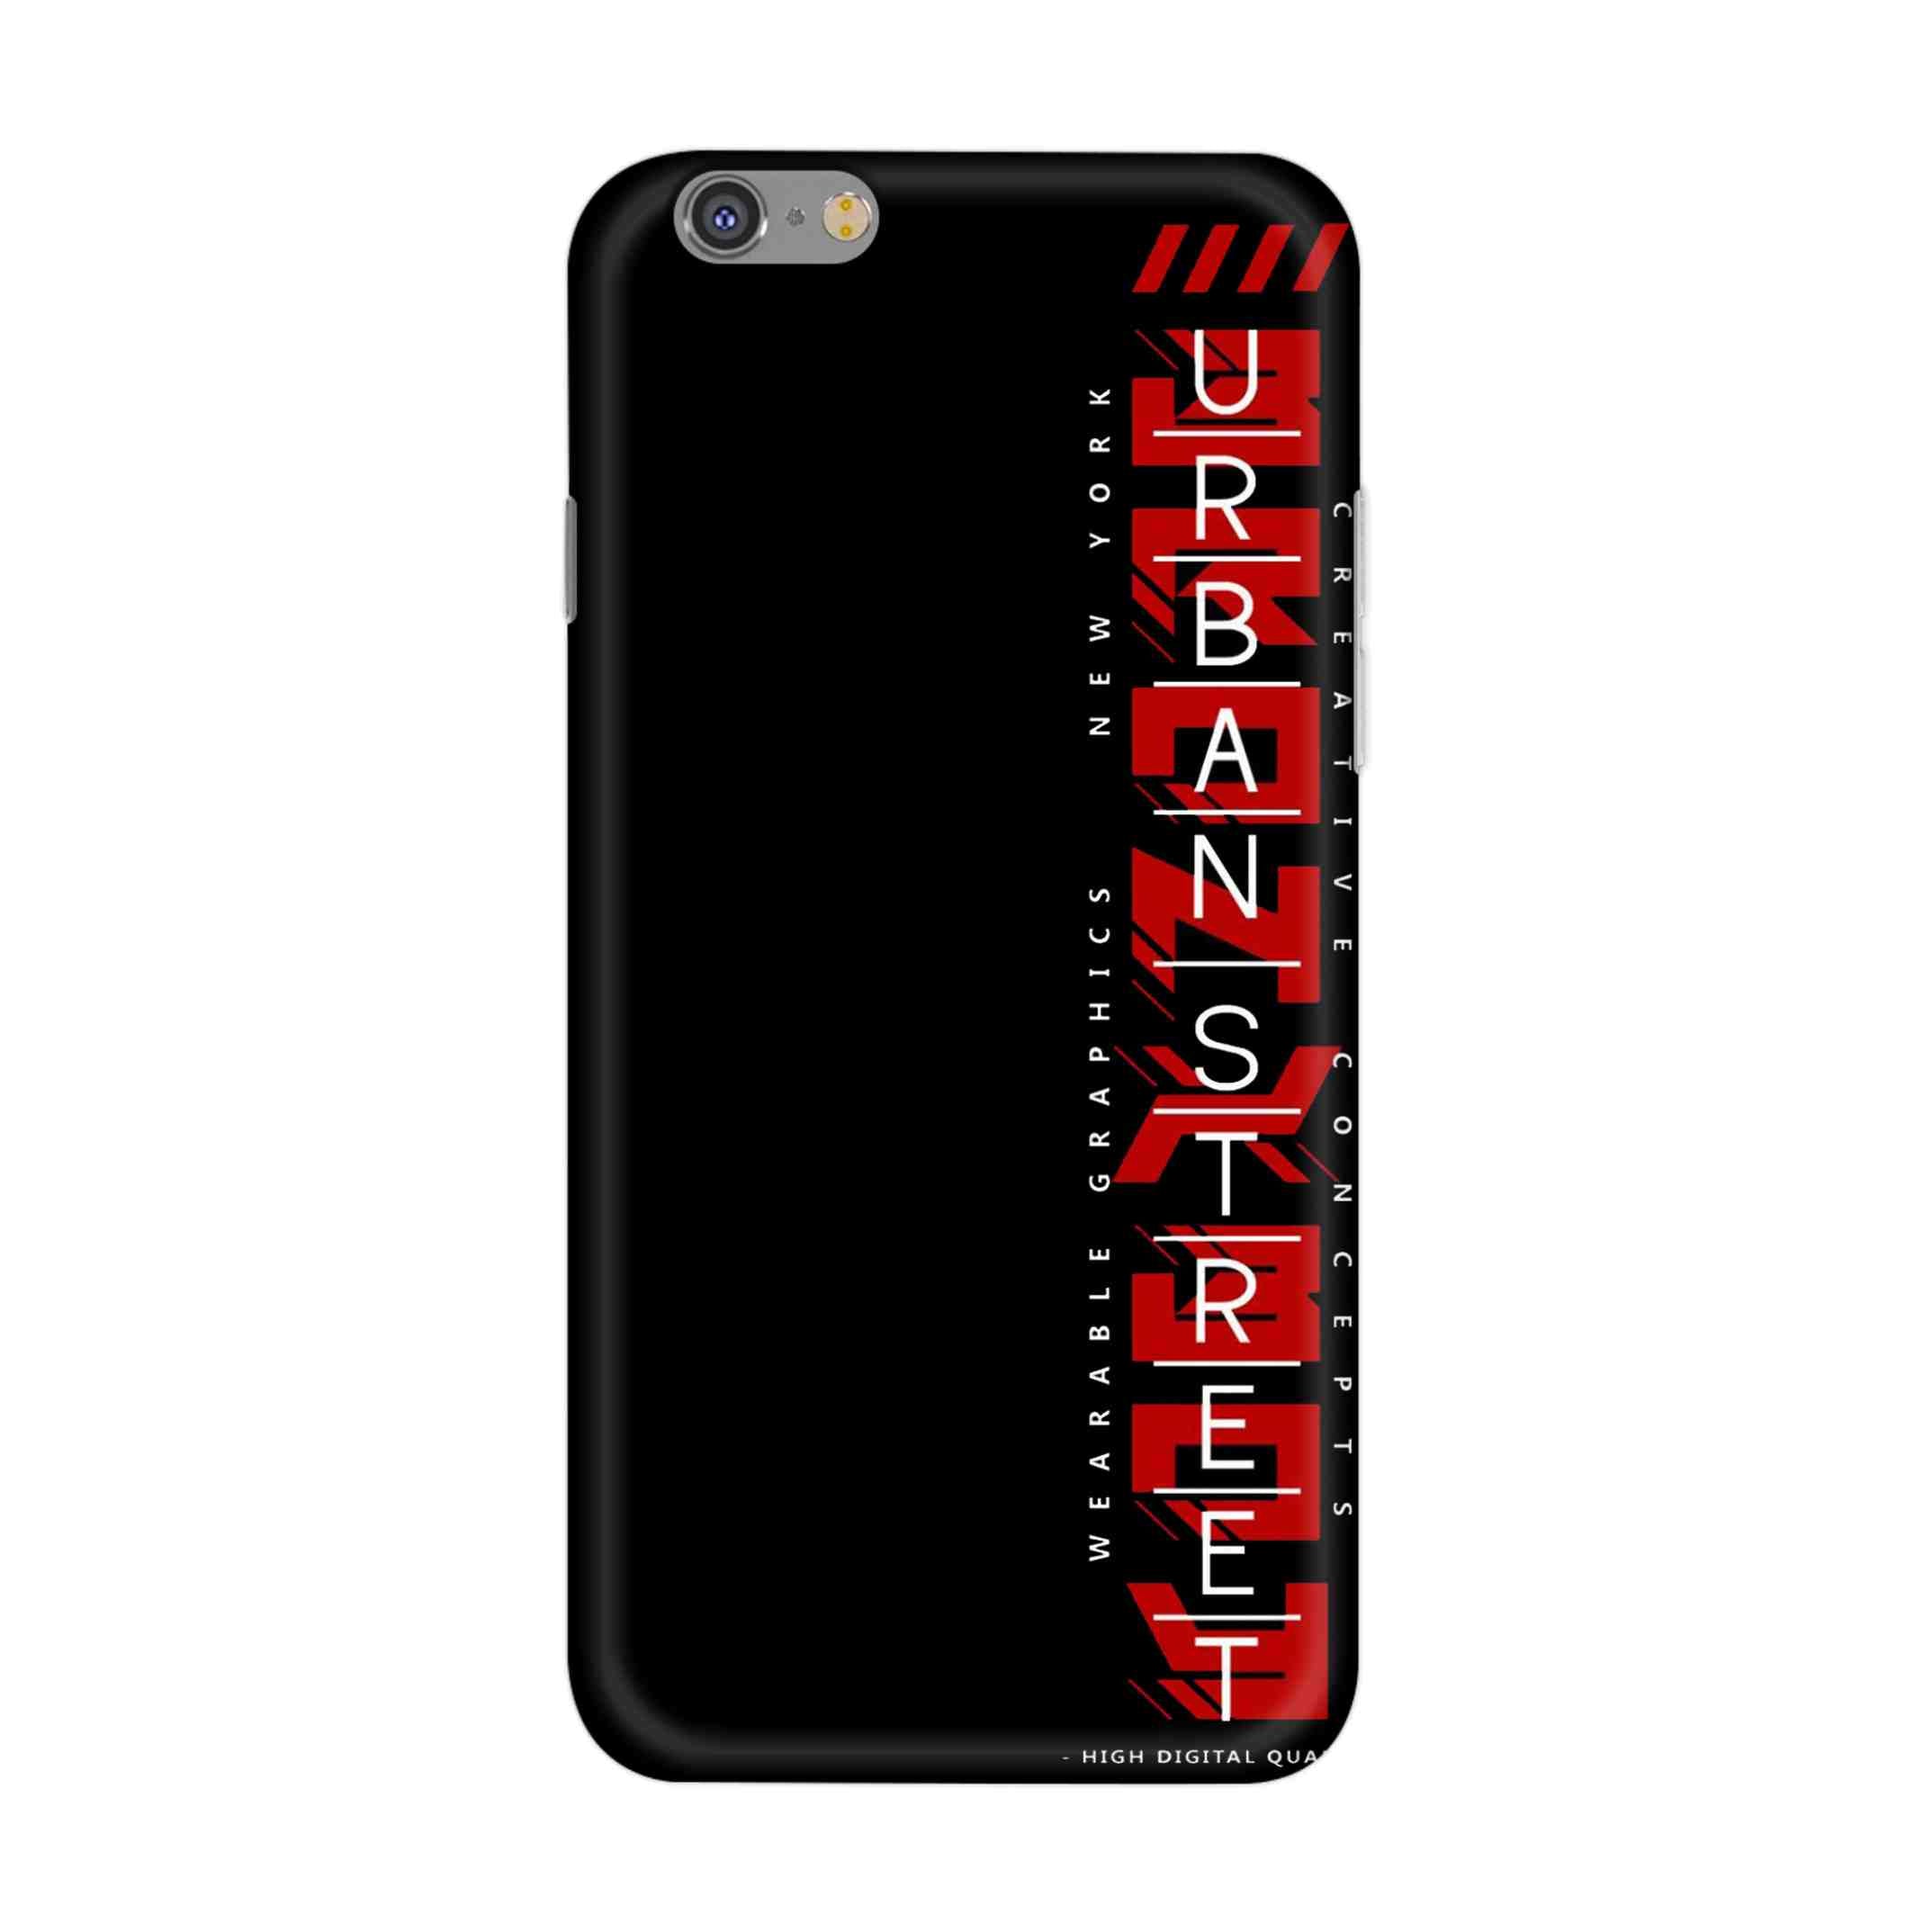 Buy Urban Street Hard Back Mobile Phone Case/Cover For iPhone 6 Plus / 6s Plus Online